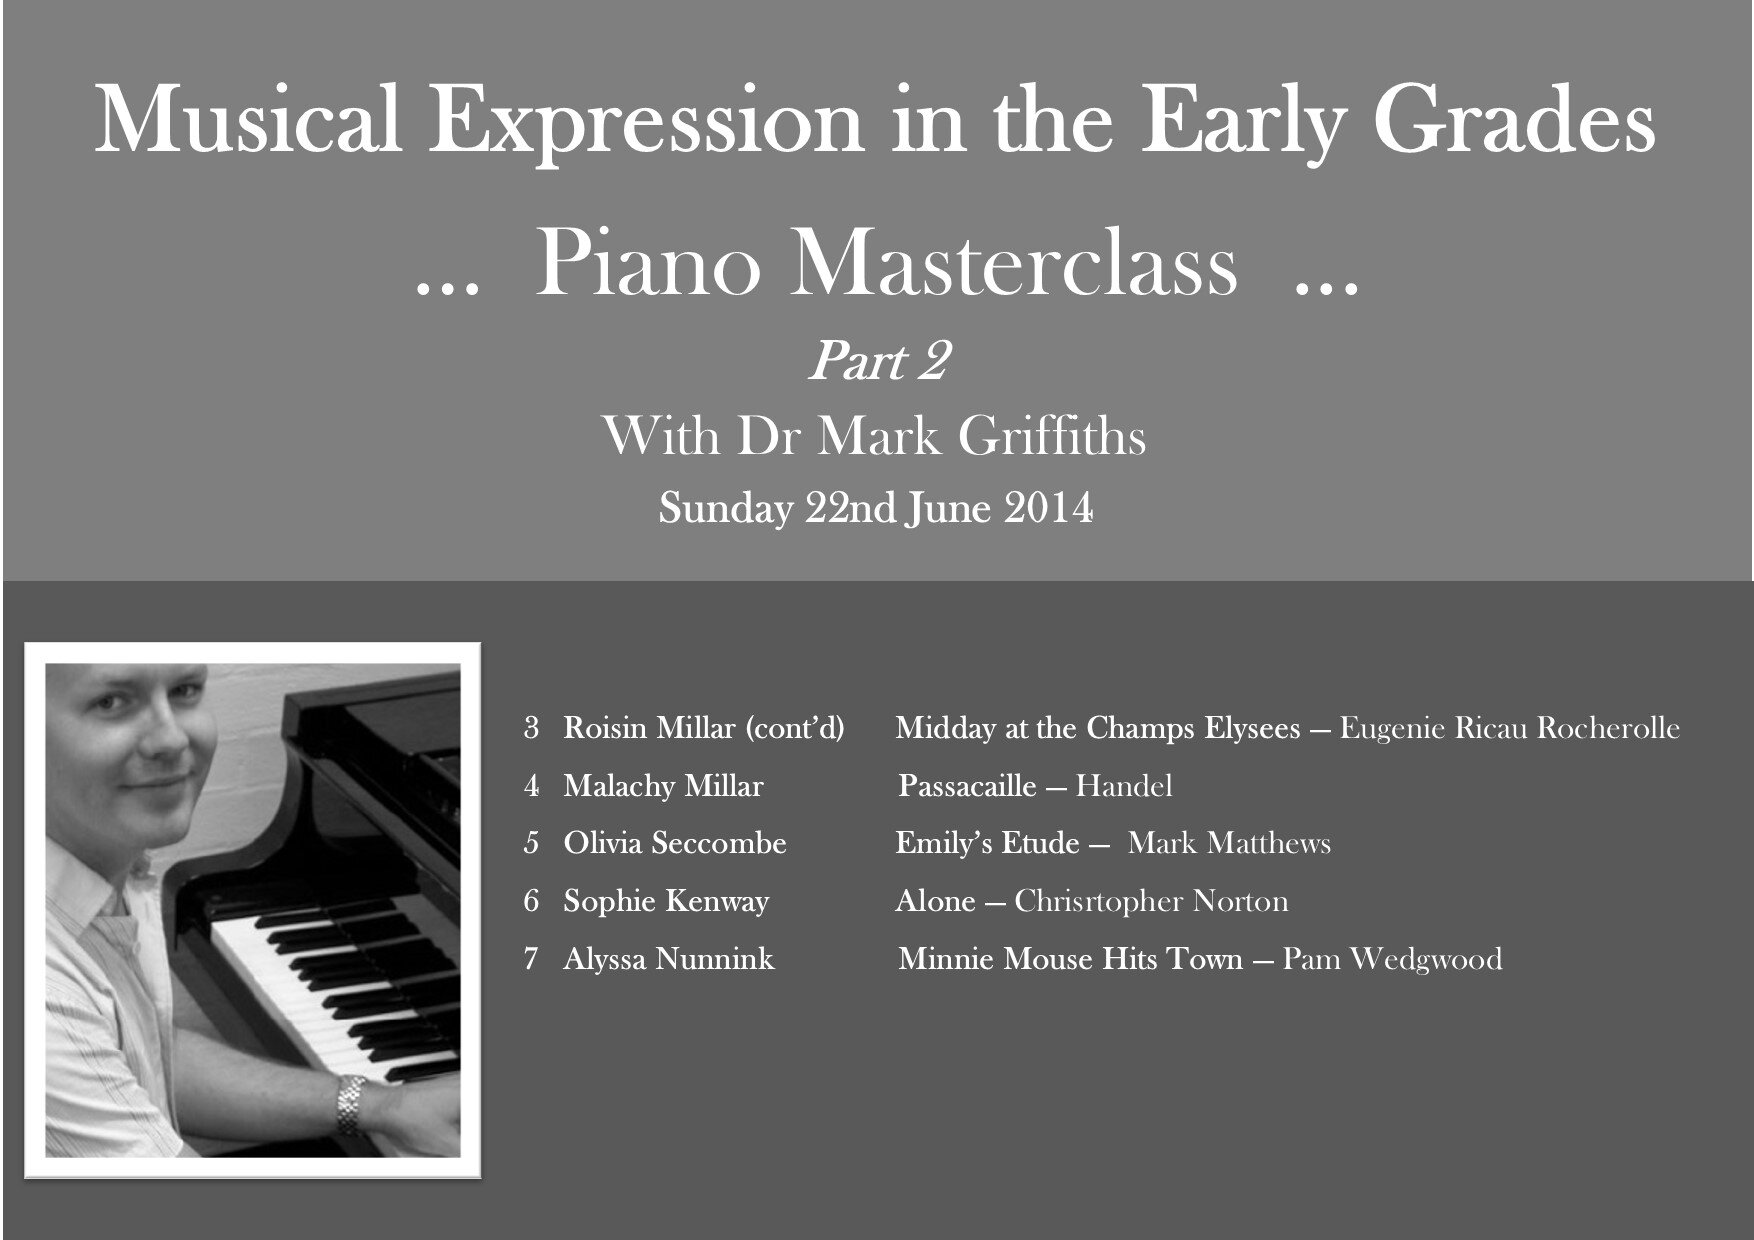 Musical Expression in the Early Grades (Part 2) with Dr Mark Griffiths